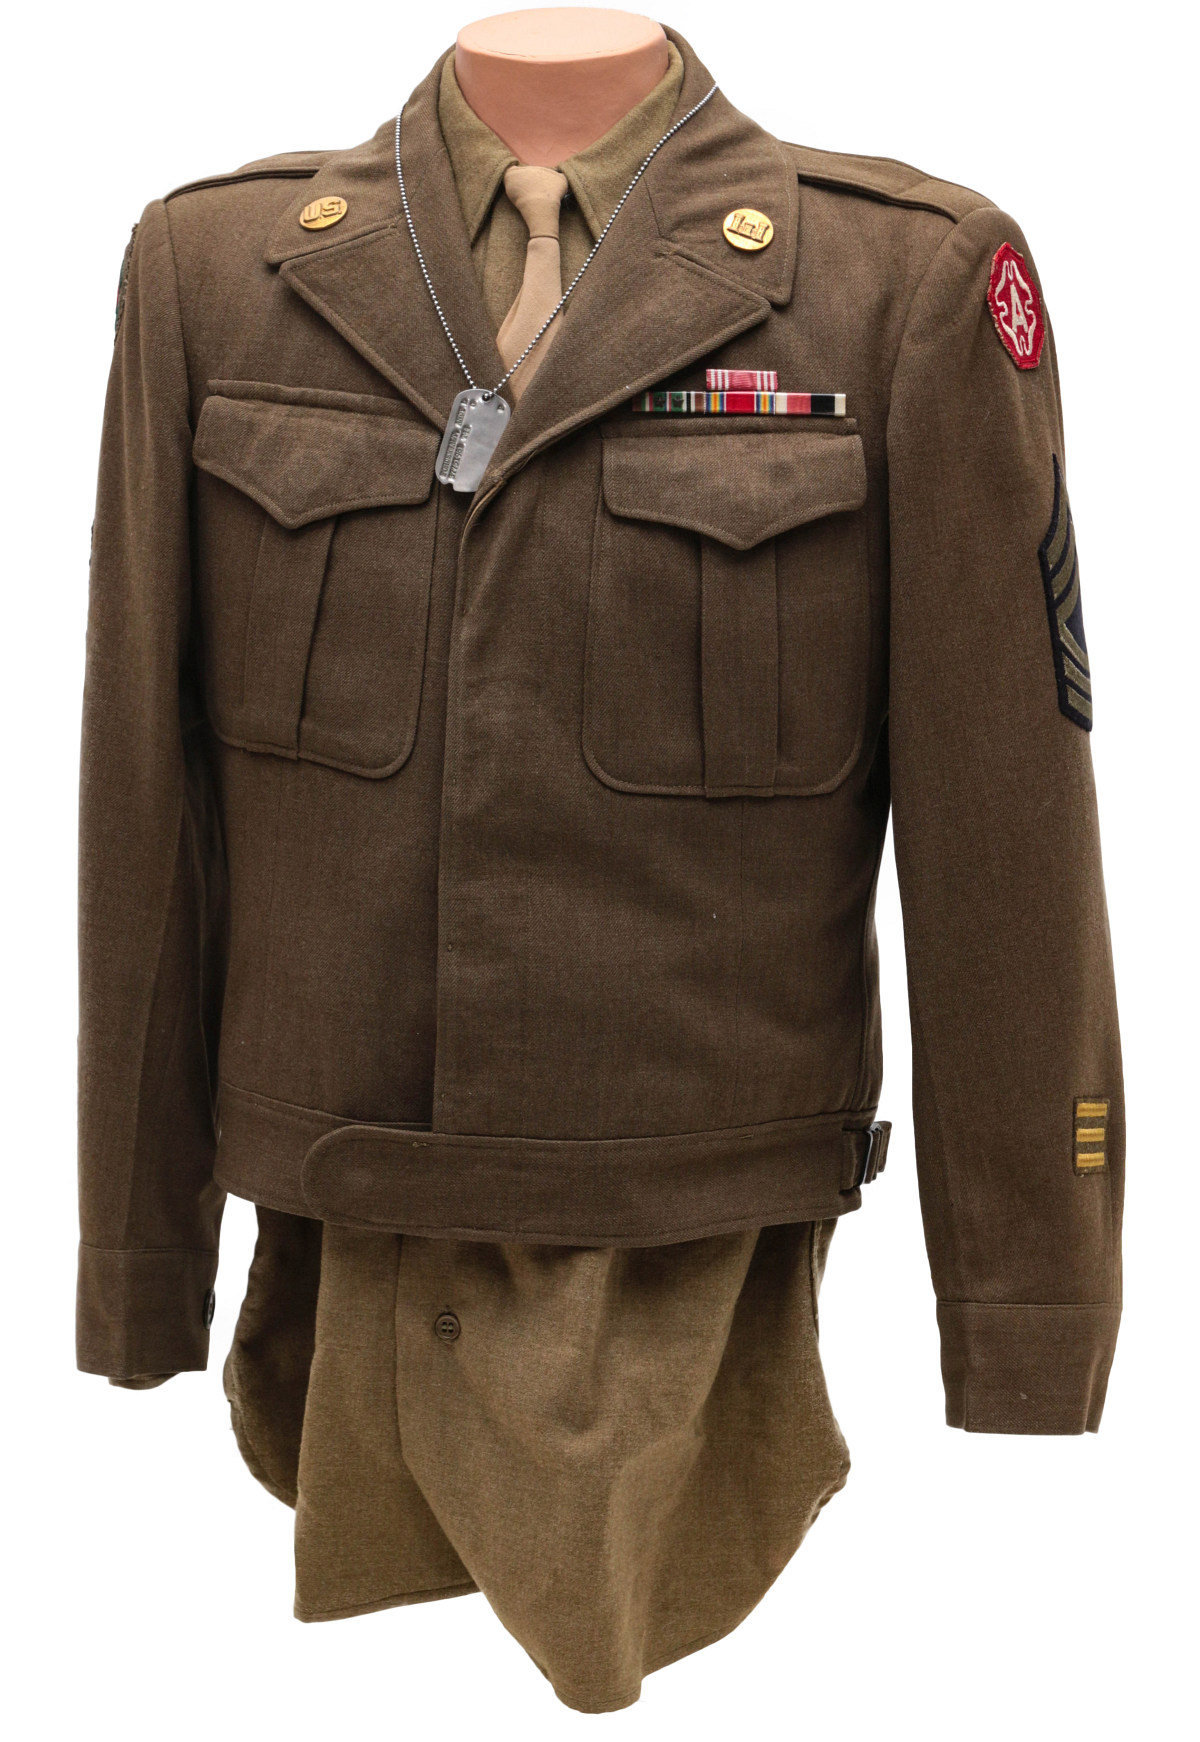 MASTER SGT. ANDY FORDEMWALT, IKE UNIFORM AND ARCHIVE